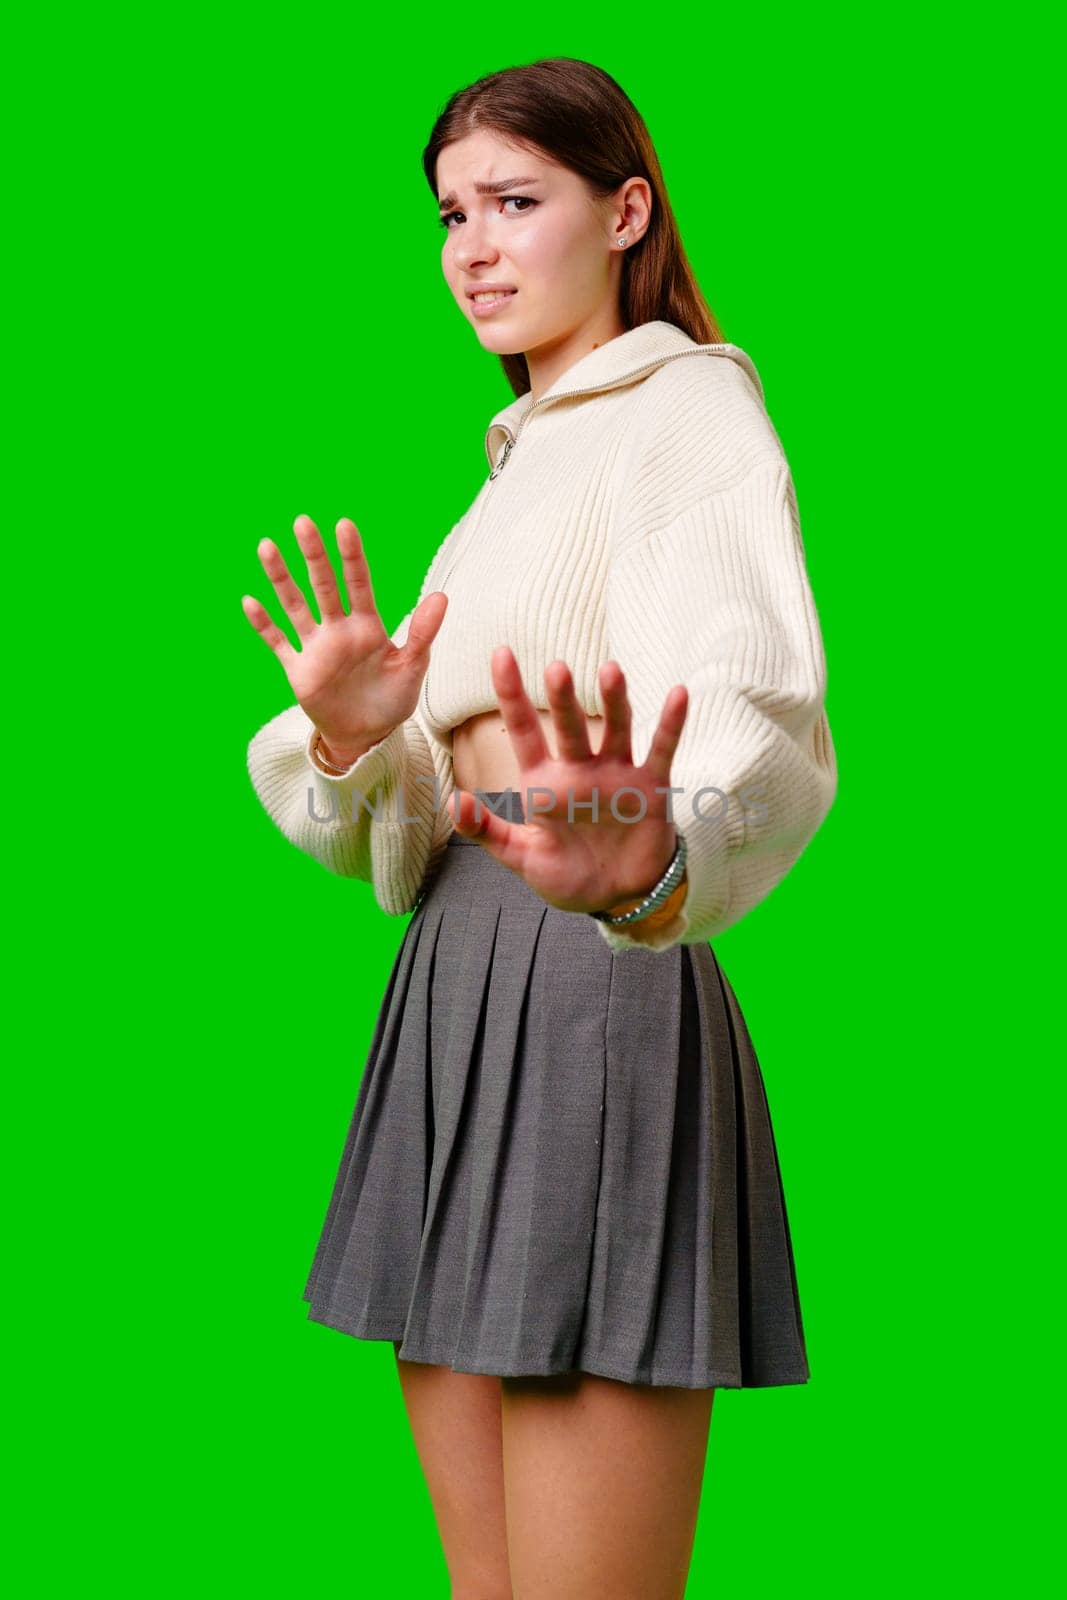 Young Woman Gesturing Stop With Both Hands Against a Green Background by Fabrikasimf